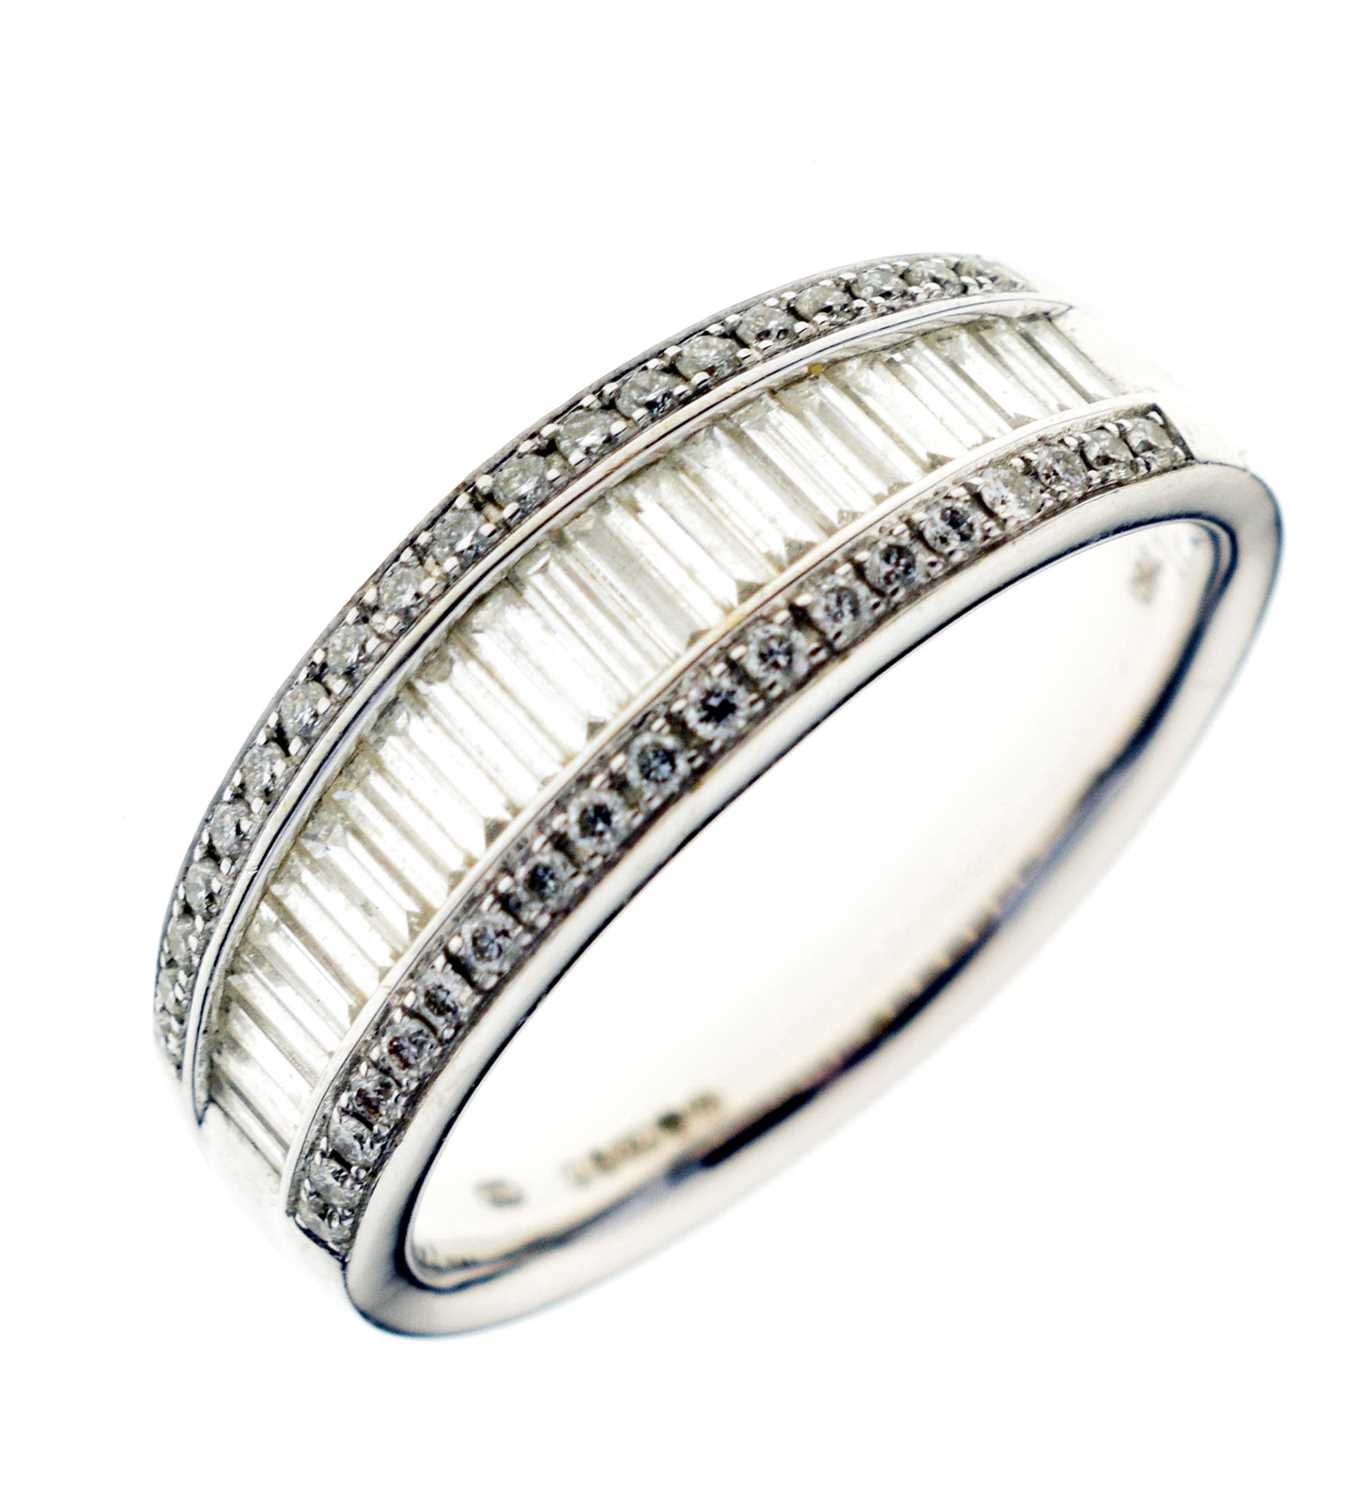 18ct white gold, baguette and brilliant cut diamond ring